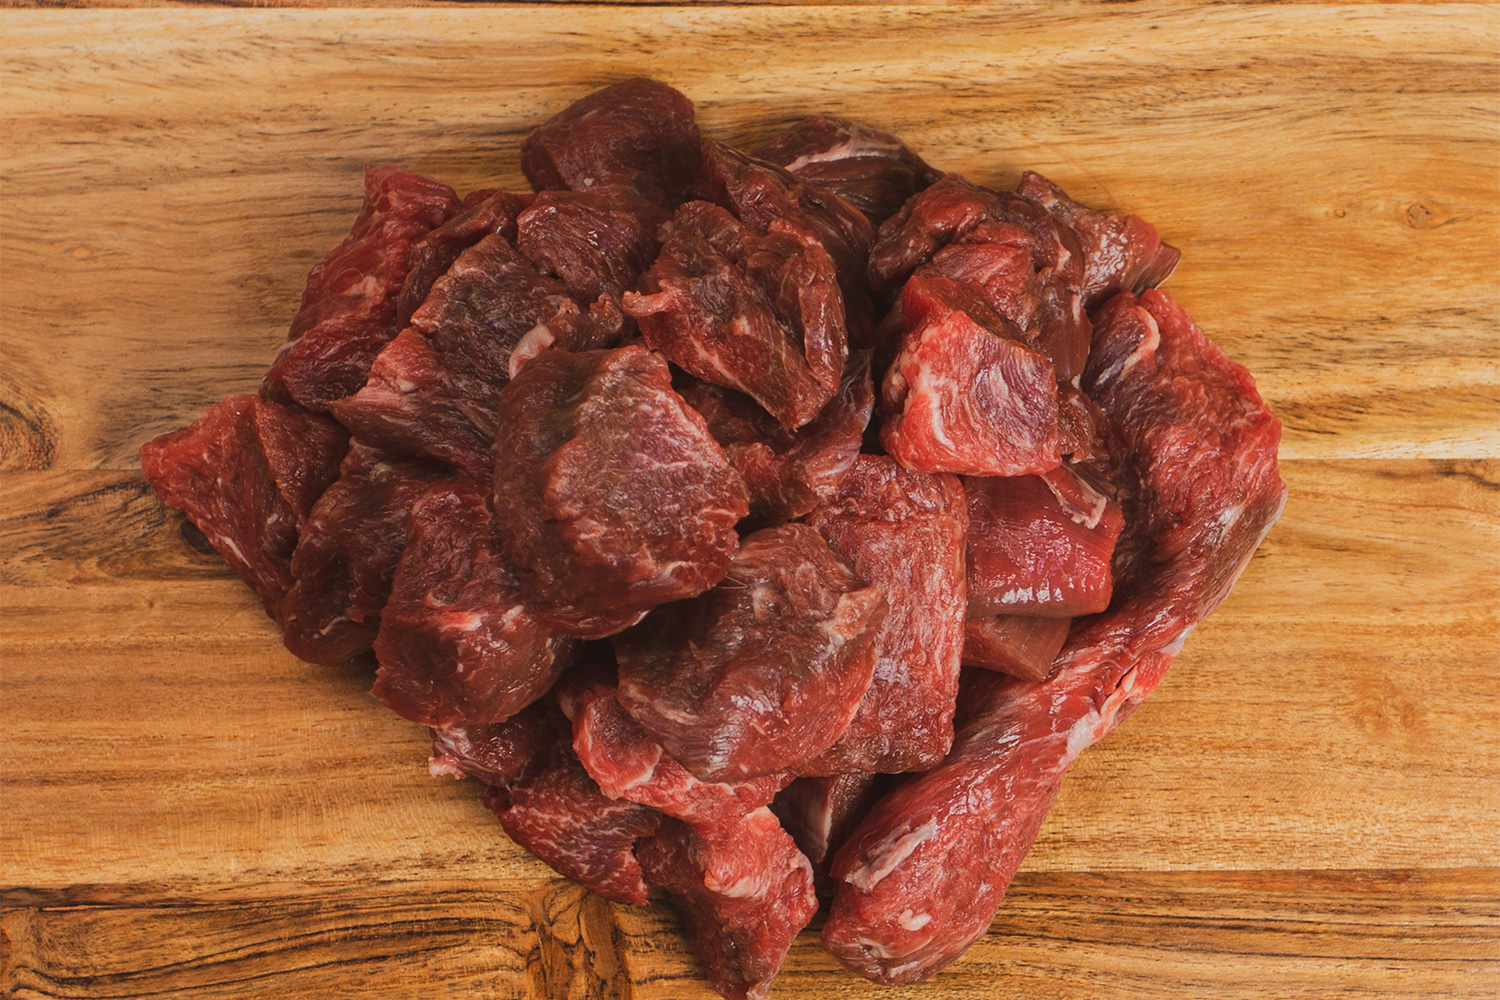 Premium goat meat, offering a wholesome and tasty dog food for your cherished pet